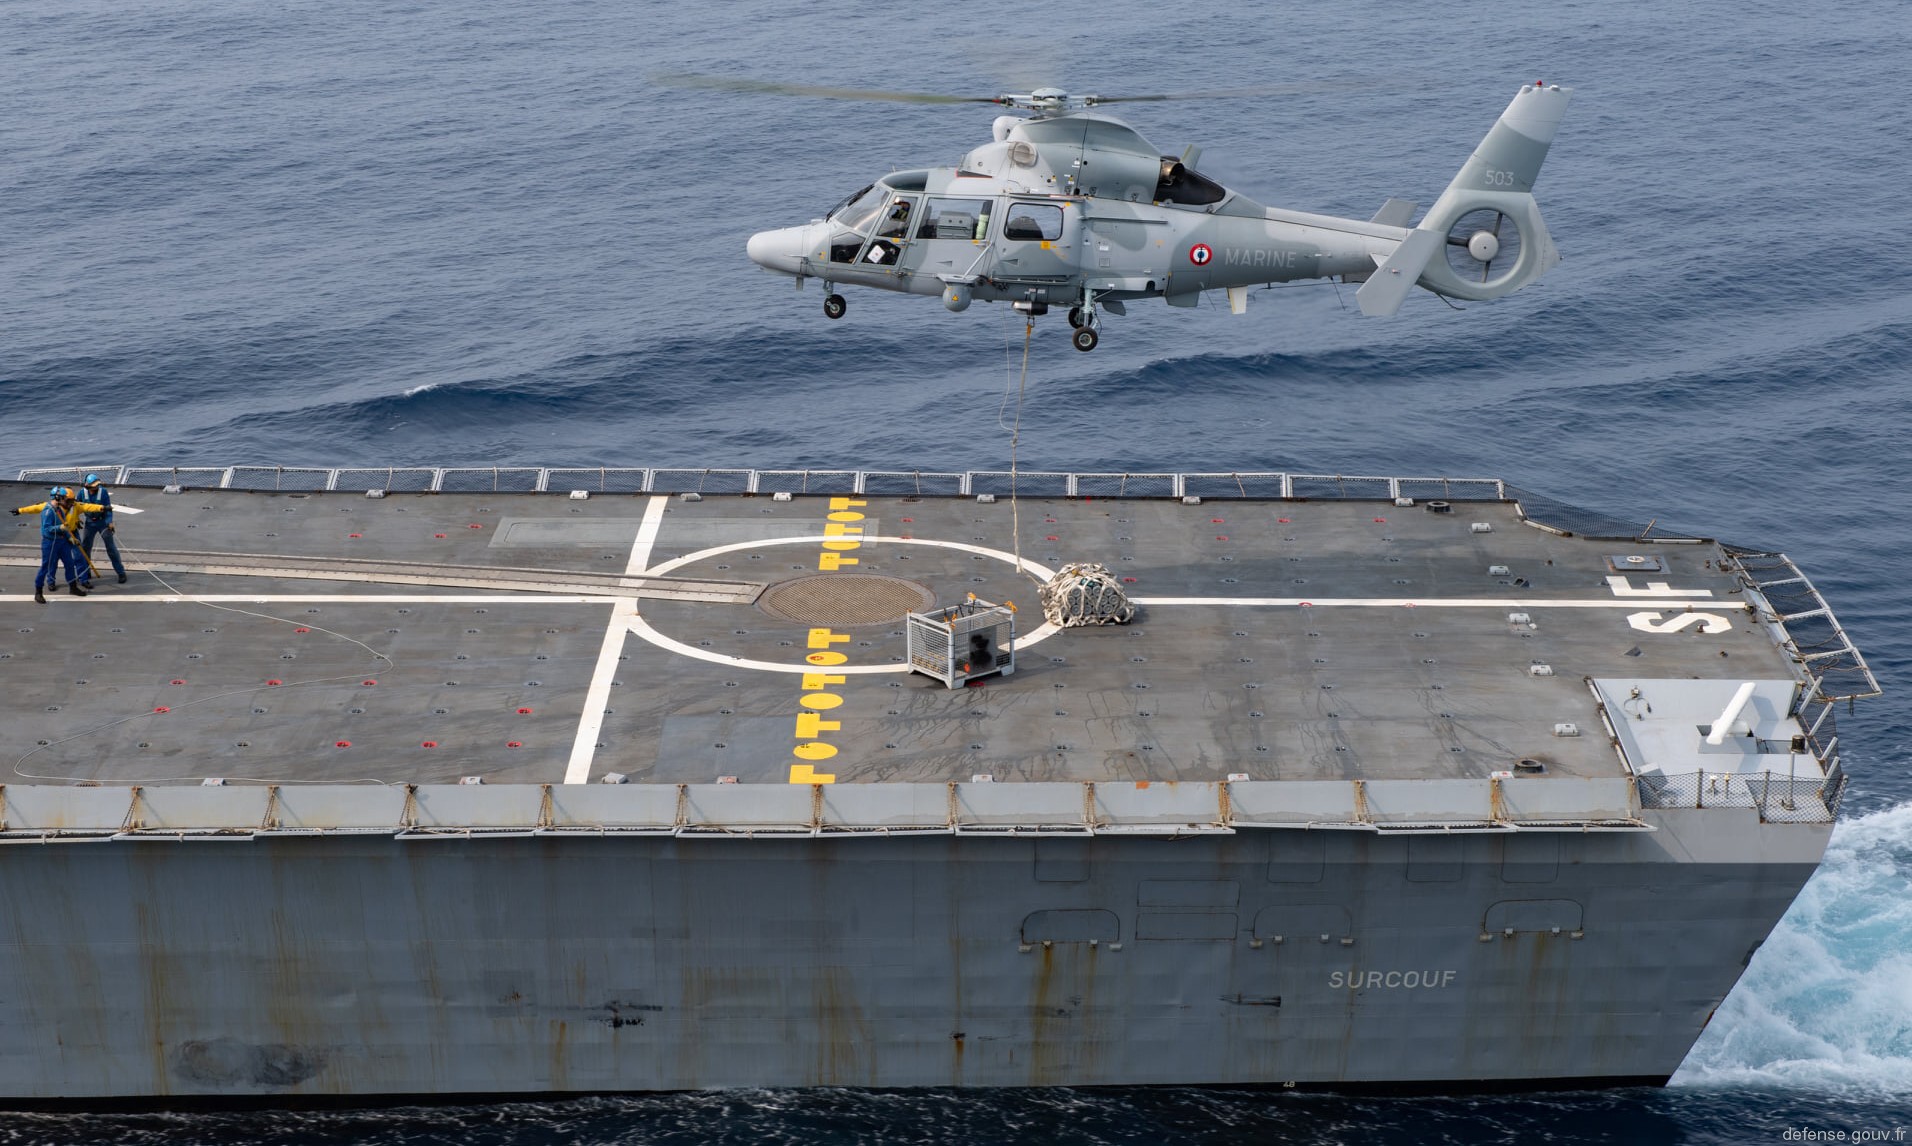 f-711 fs surcouf la fayette class stealth frigate french navy marine nationale 35 dauphin panther helicopter